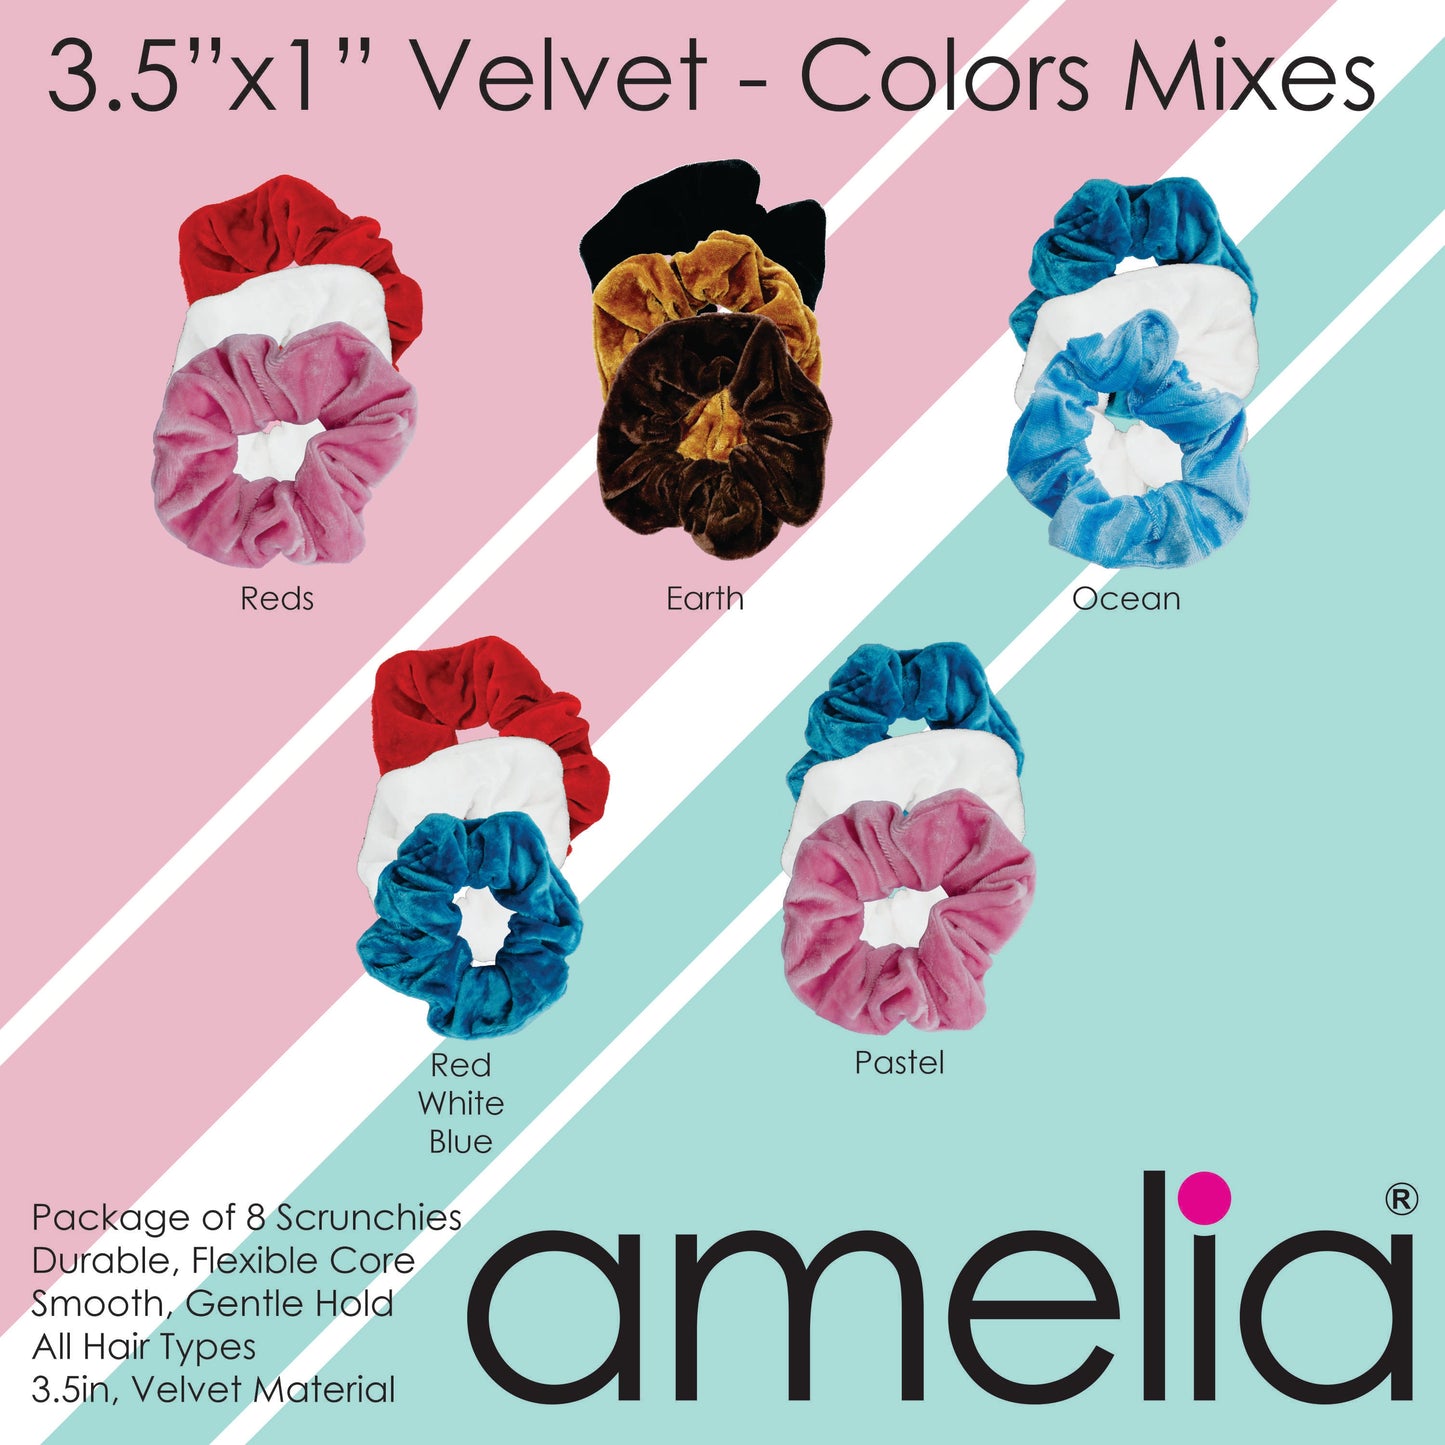 Amelia Beauty, Gray Velvet Scrunchies, 3.5in Diameter, Gentle on Hair, Strong Hold, No Snag, No Dents or Creases. 8 Pack